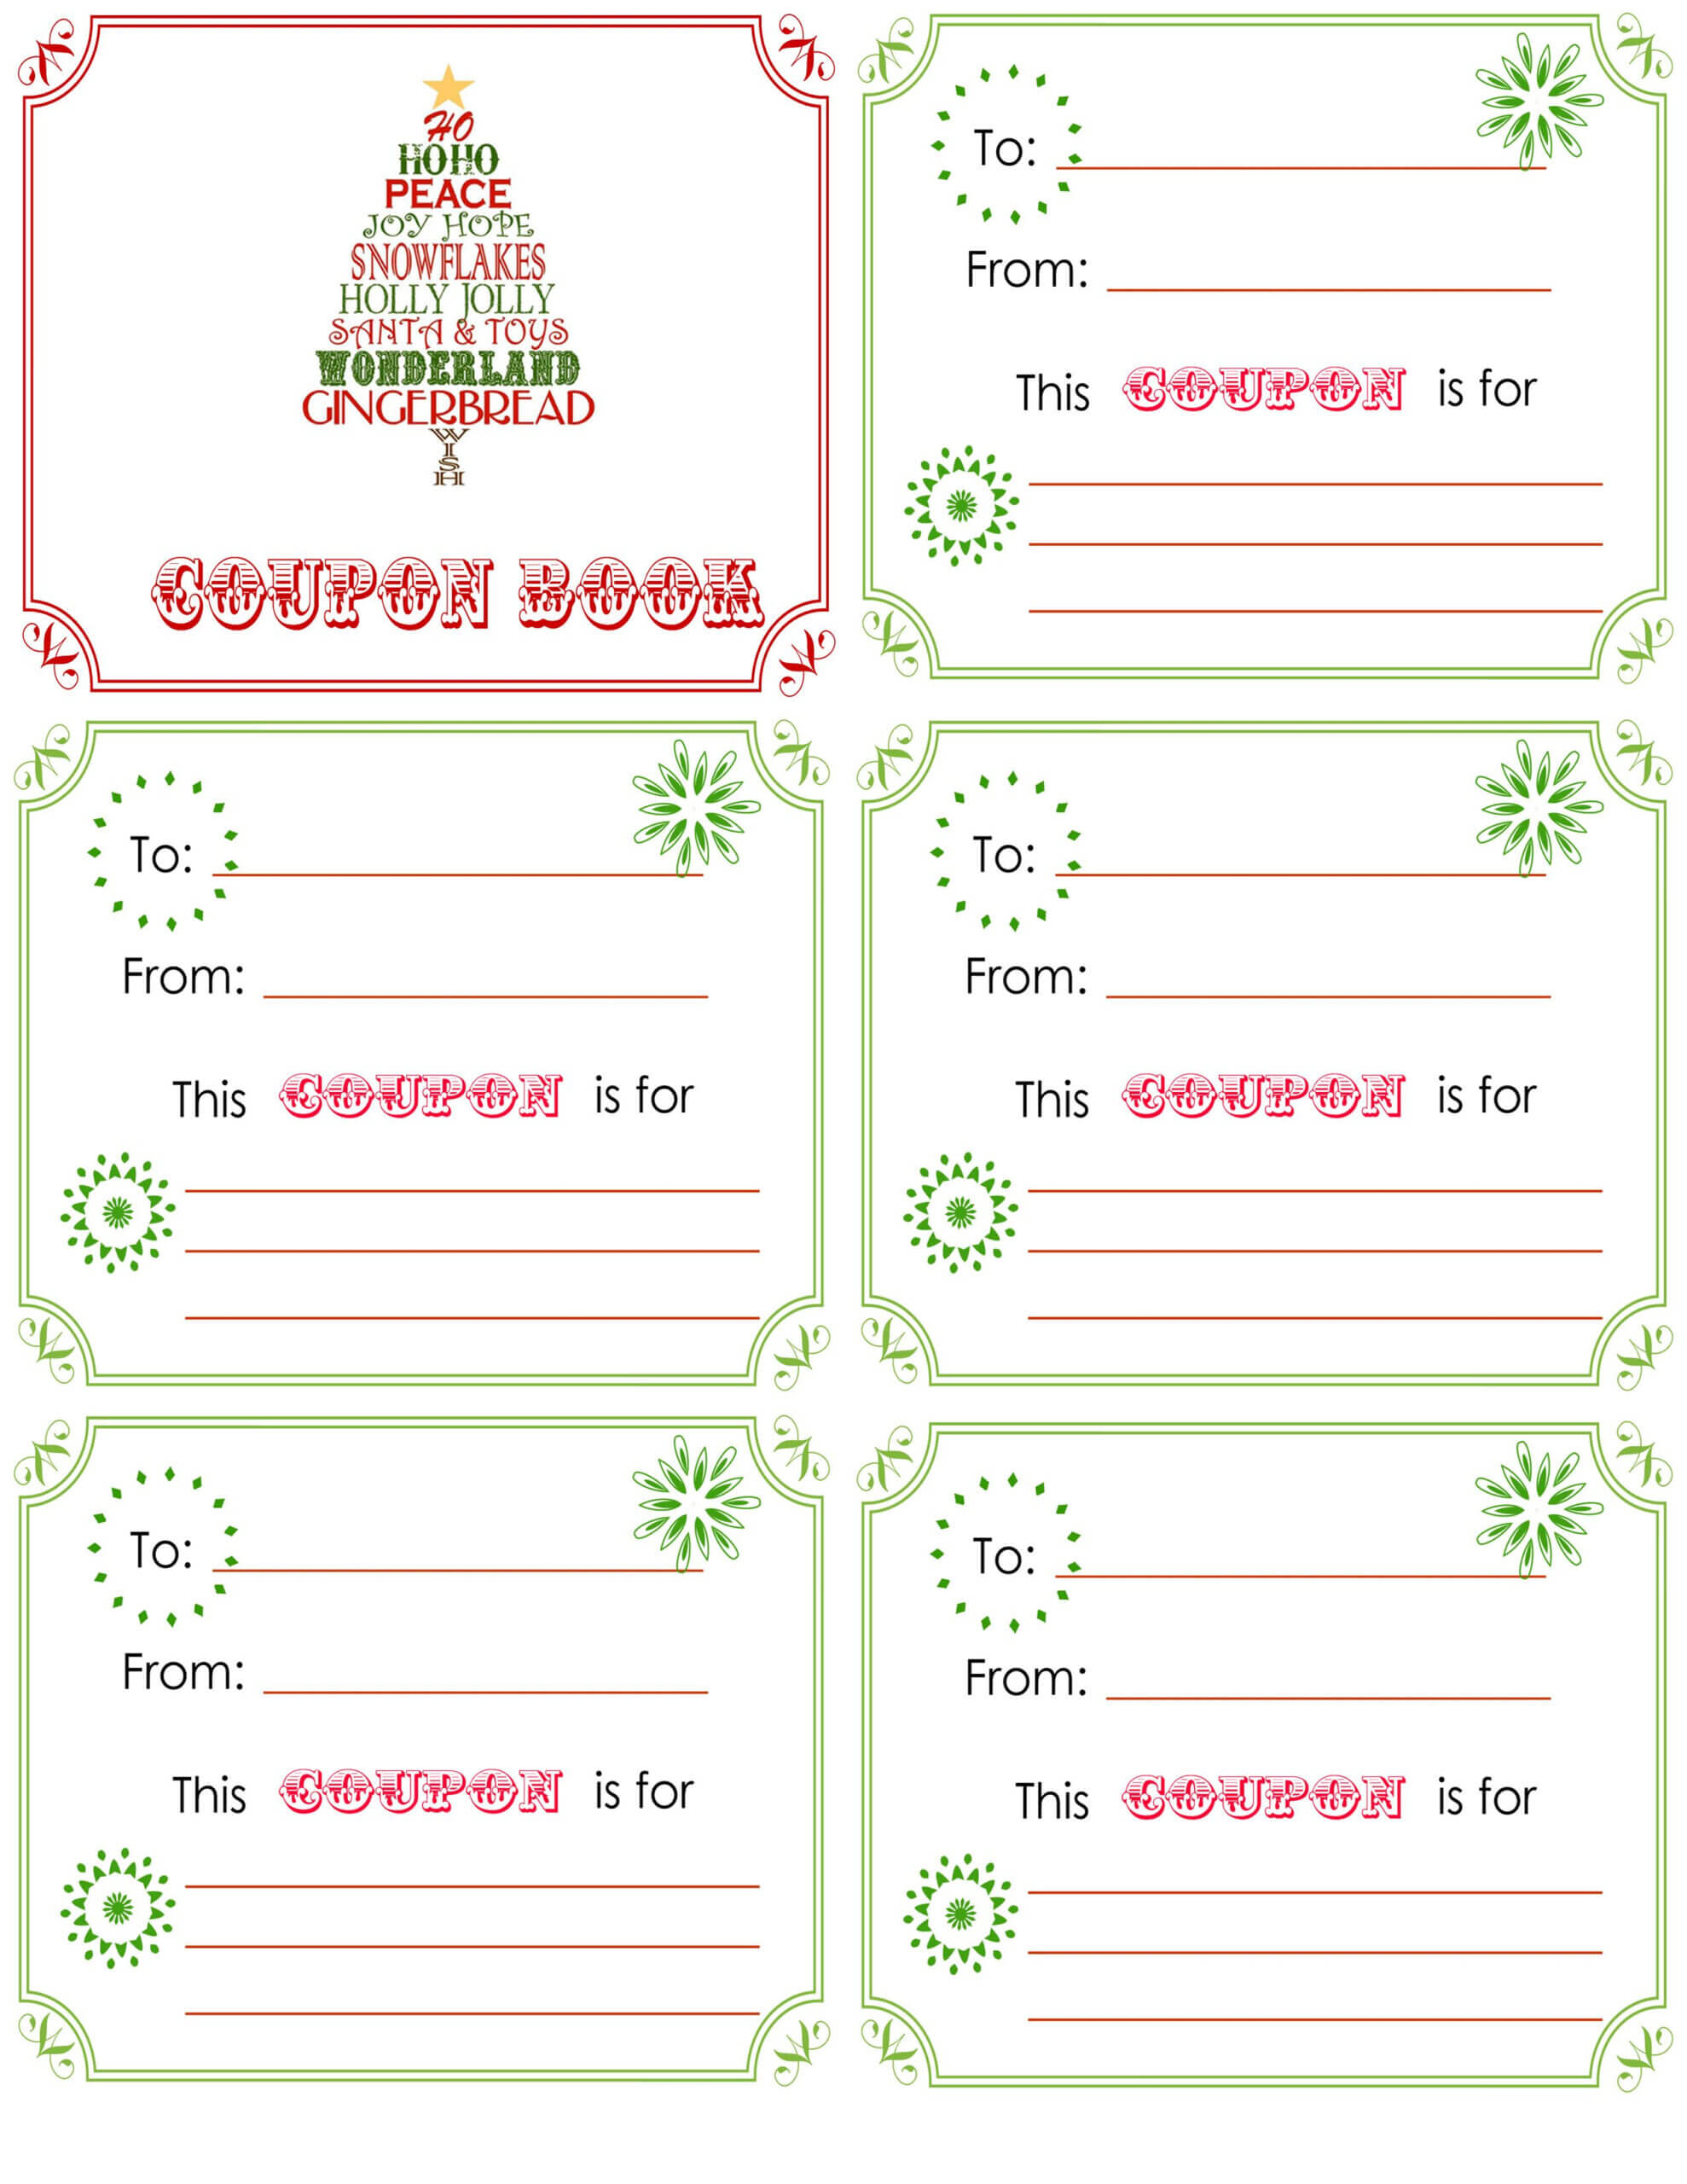 Printable Christmas Coupon Book. L Is Getting 15 Minute Within Homemade Christmas Gift Certificates Templates